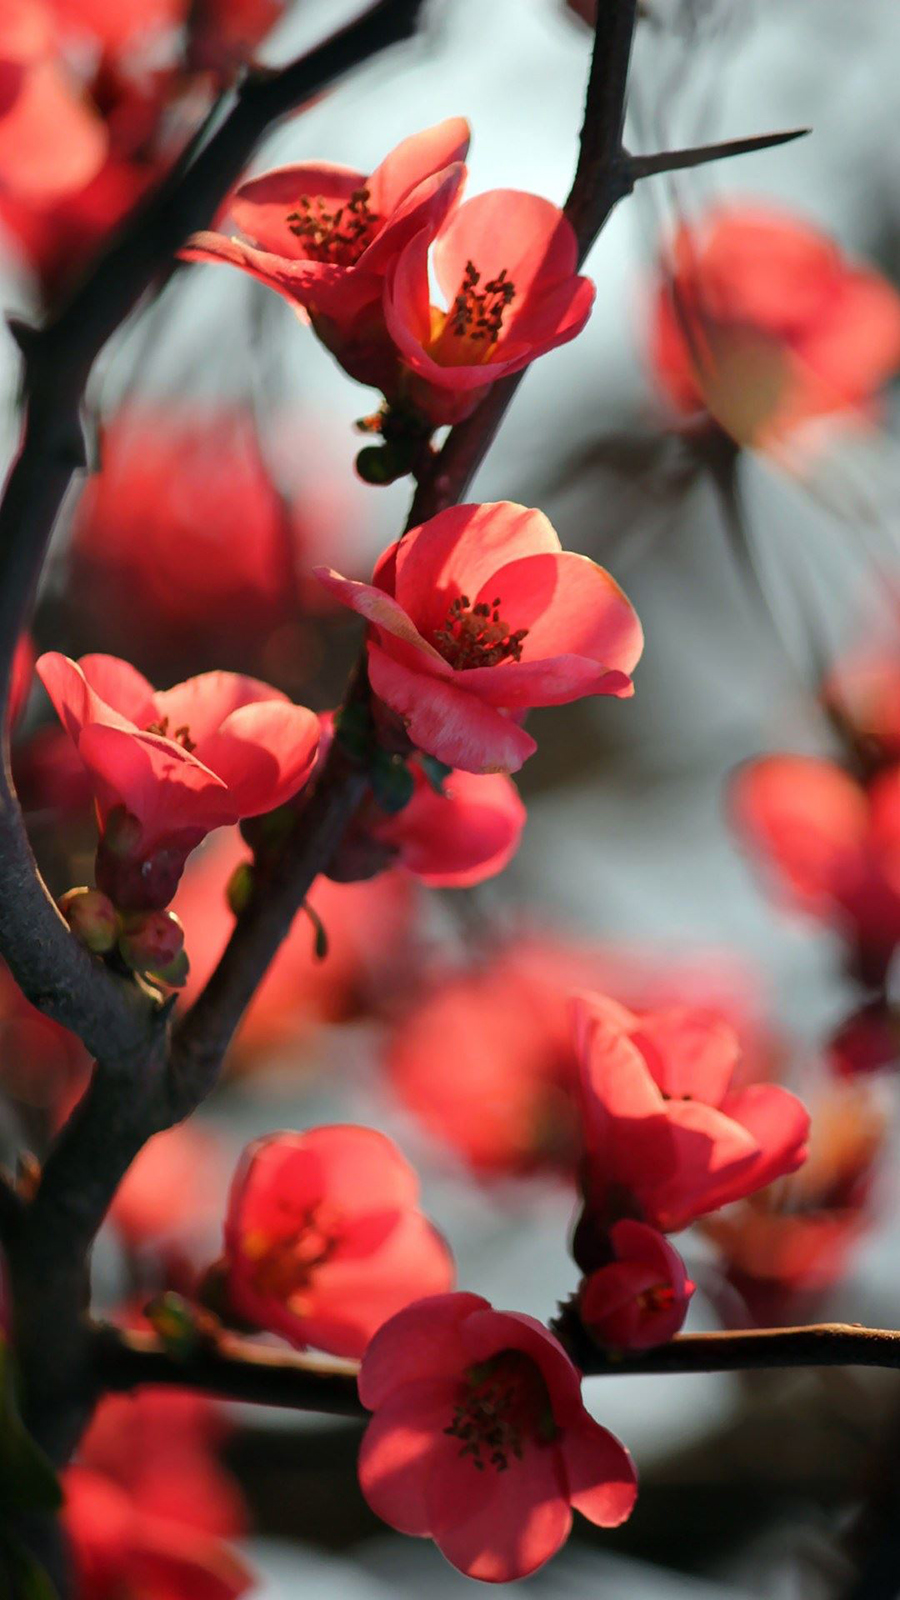 Red Cherry Blossom Flowers Macro Android Wallpaper